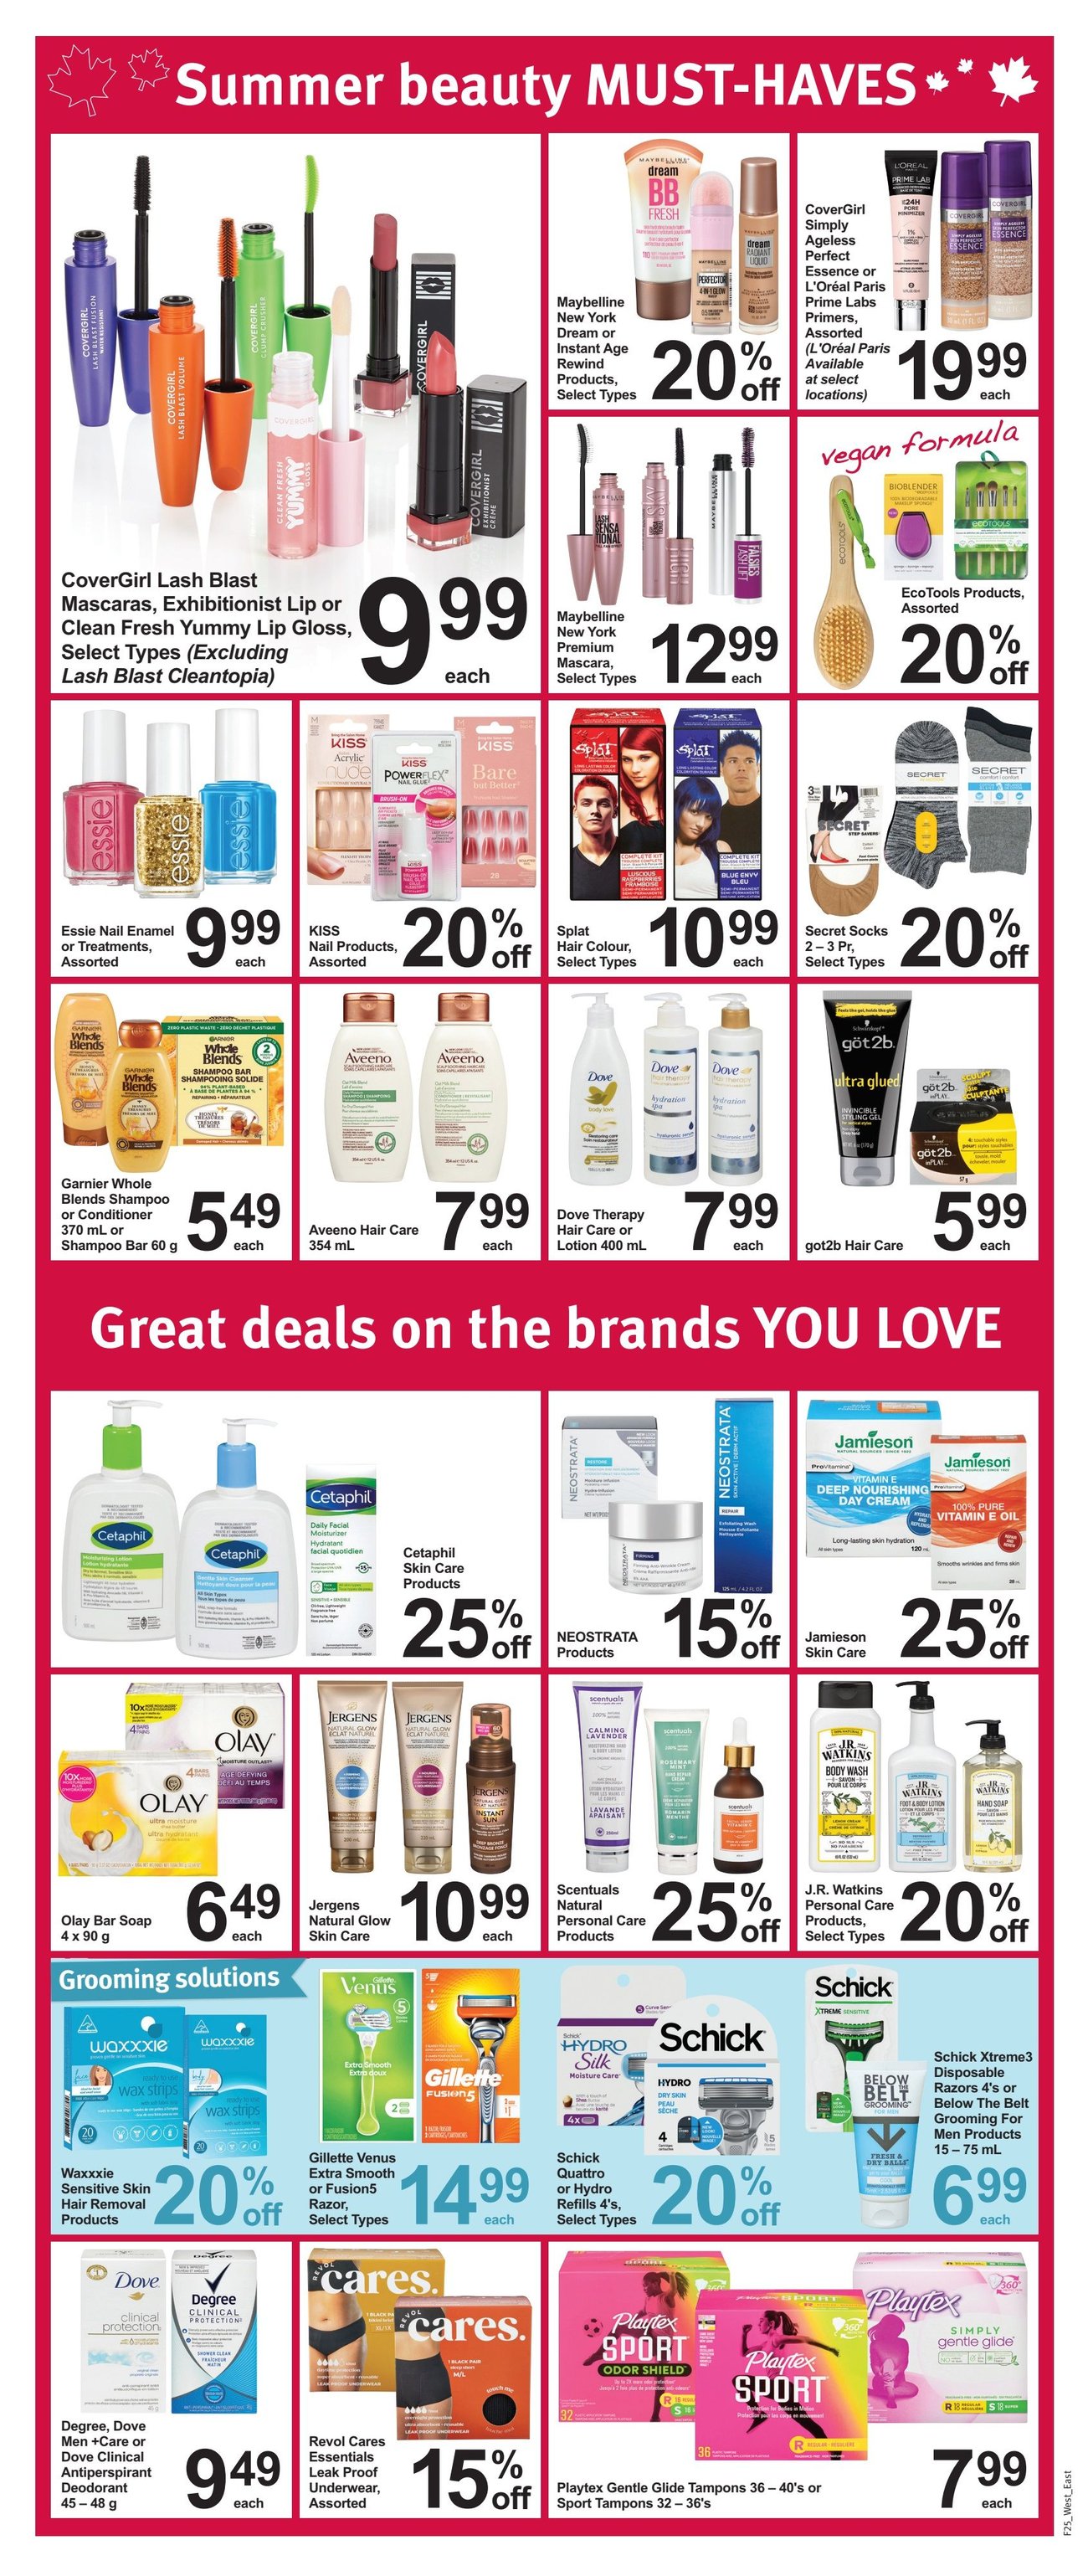 Pharmasave - Ontario - Weekly Flyer Specials - Page 2